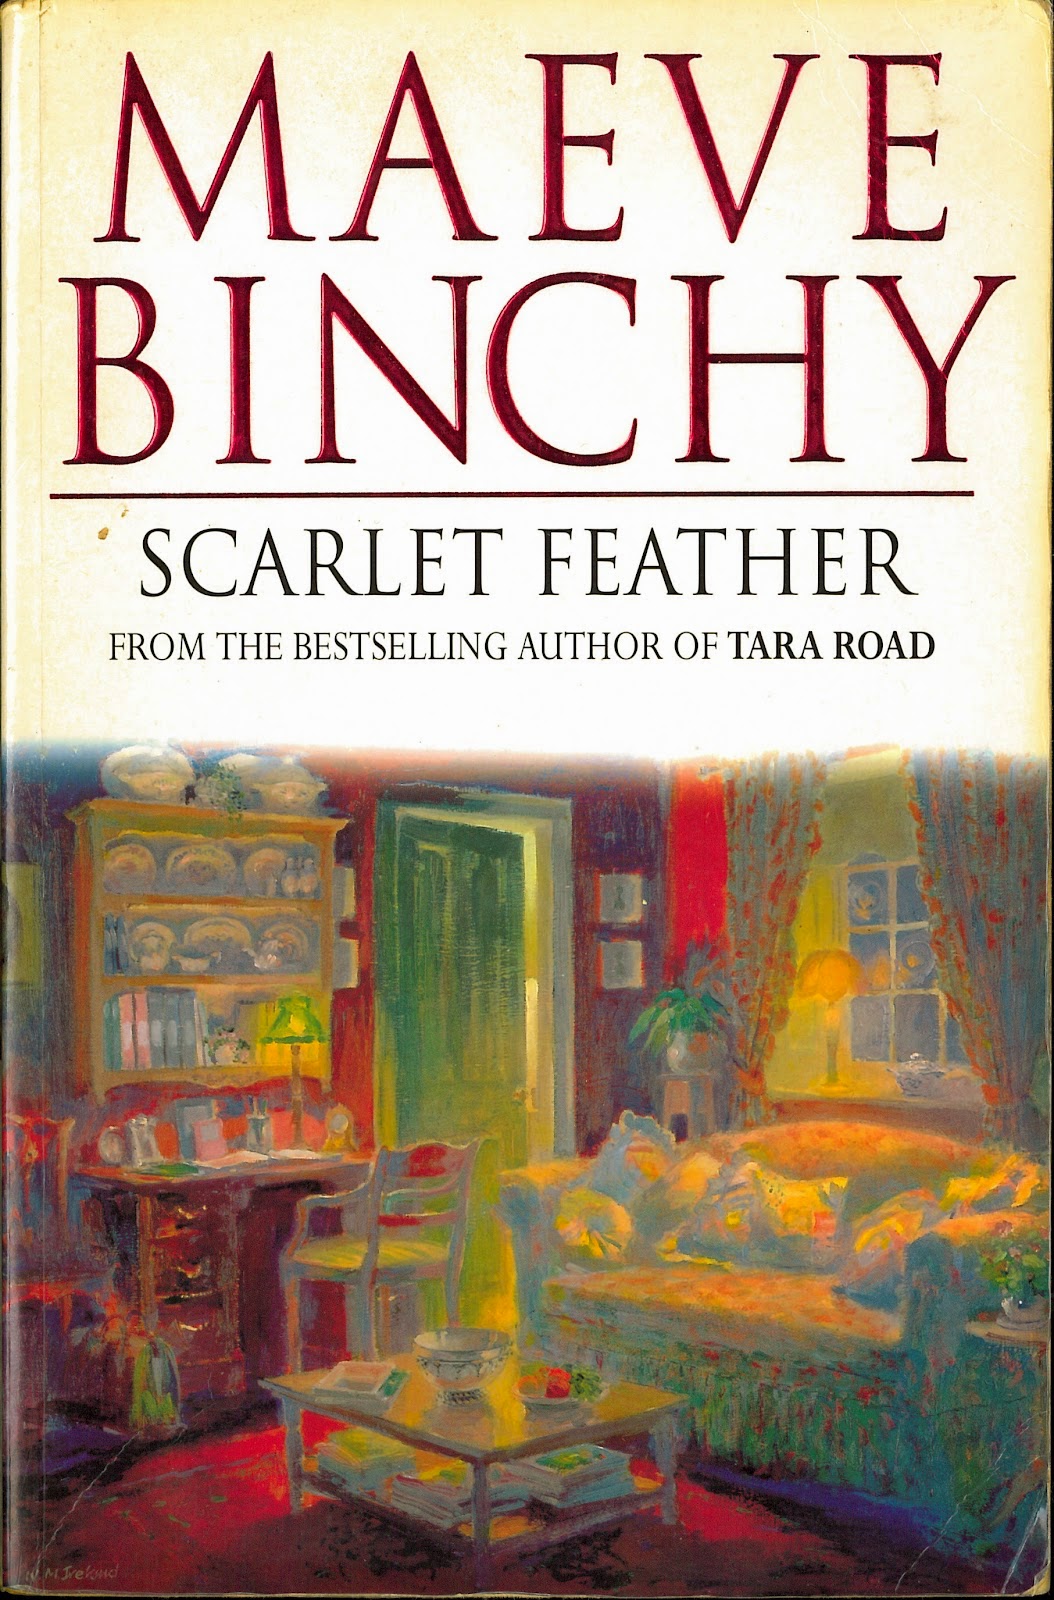 http://discover.halifaxpubliclibraries.ca/?q=title:scarlet%20feather